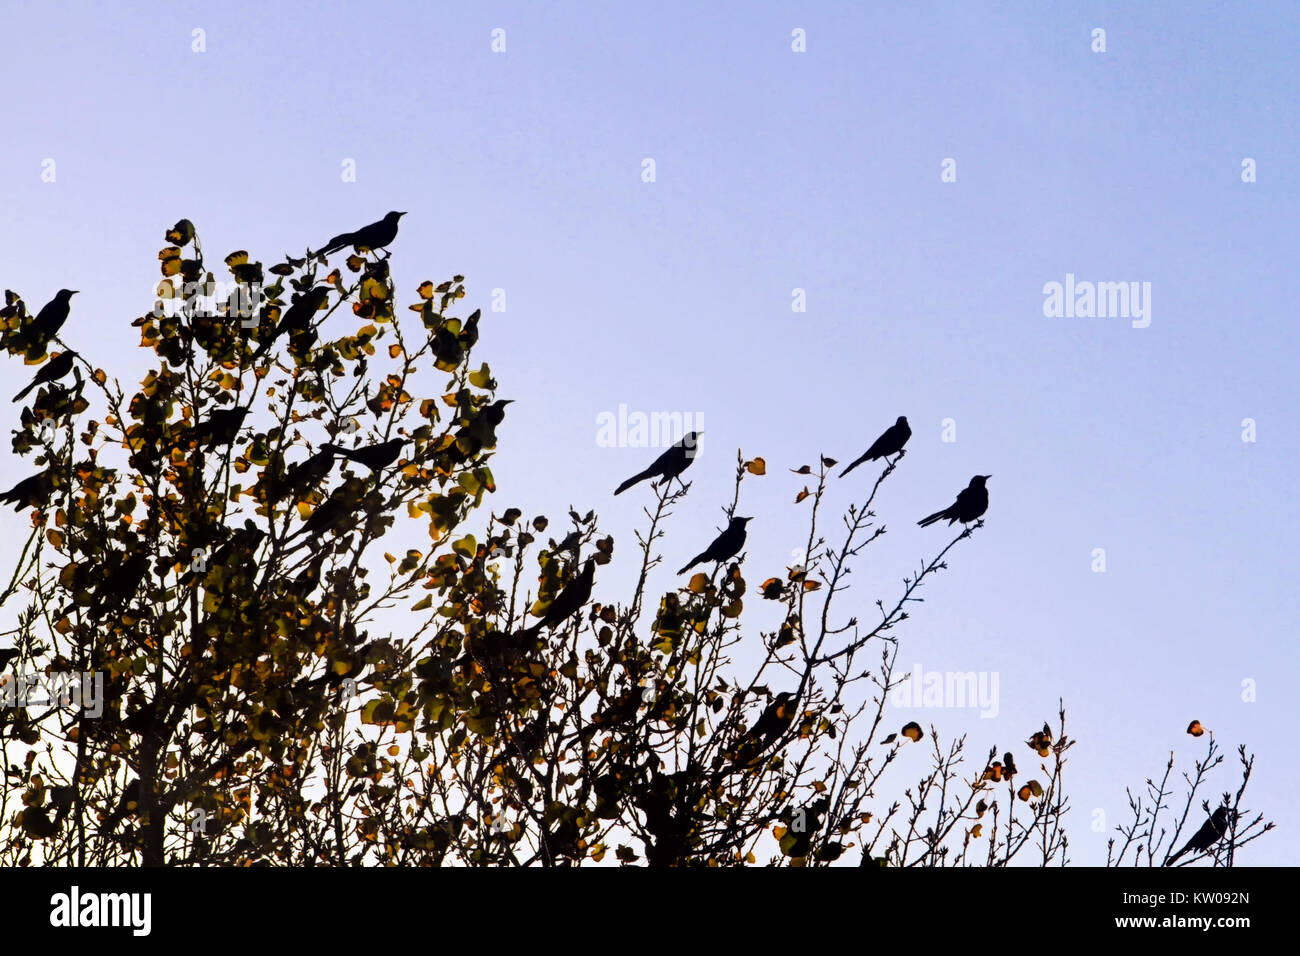 A flock of black birds sit silhouetted in the top of a tree with yellow leaves, back-lighted by an autumn sunset. Stock Photo